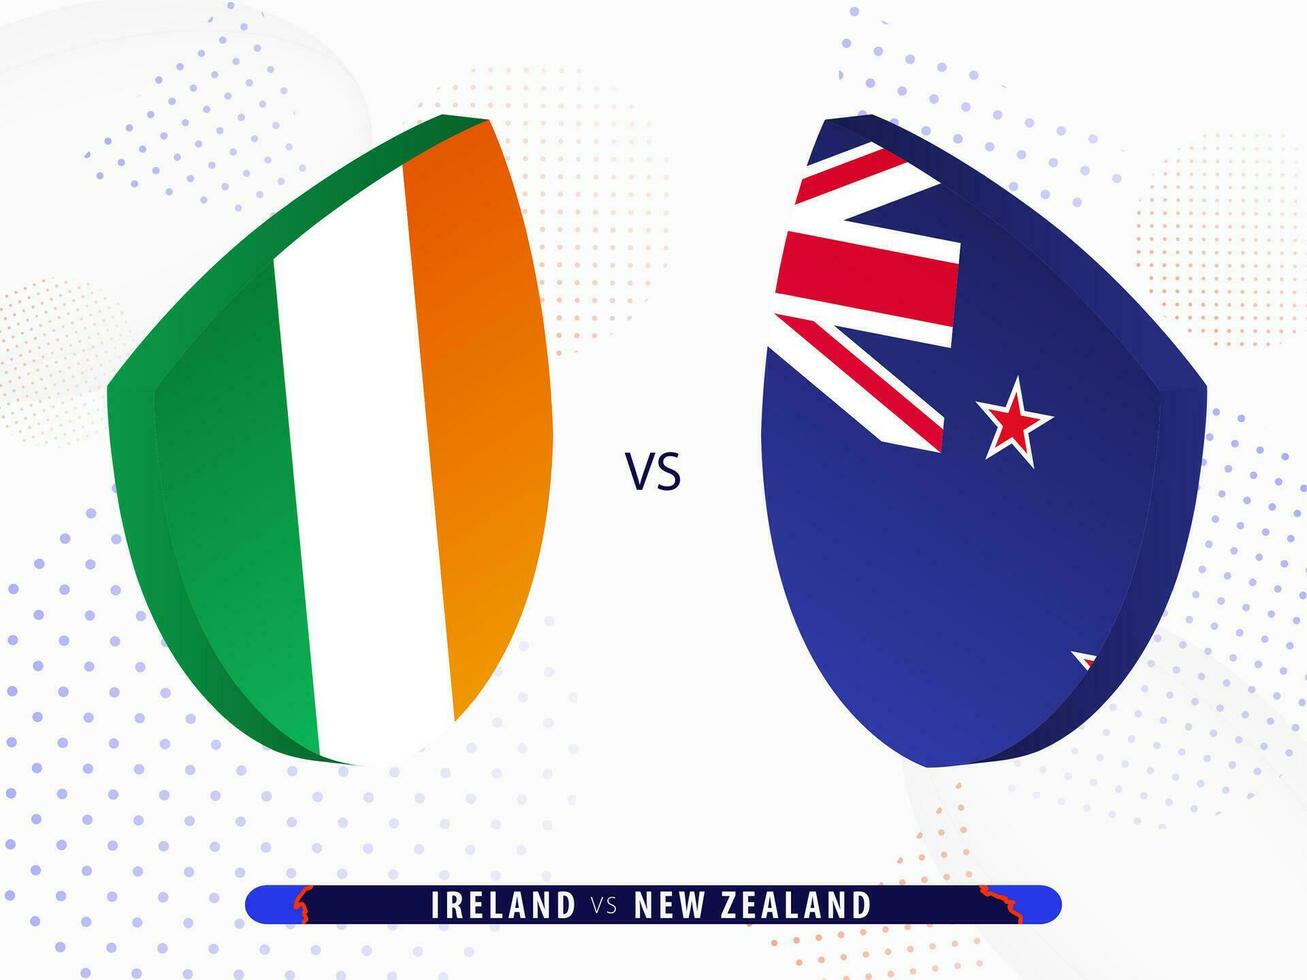 Ireland vs New Zealand quarter-final rugby match, international rugby competition 2023. vector